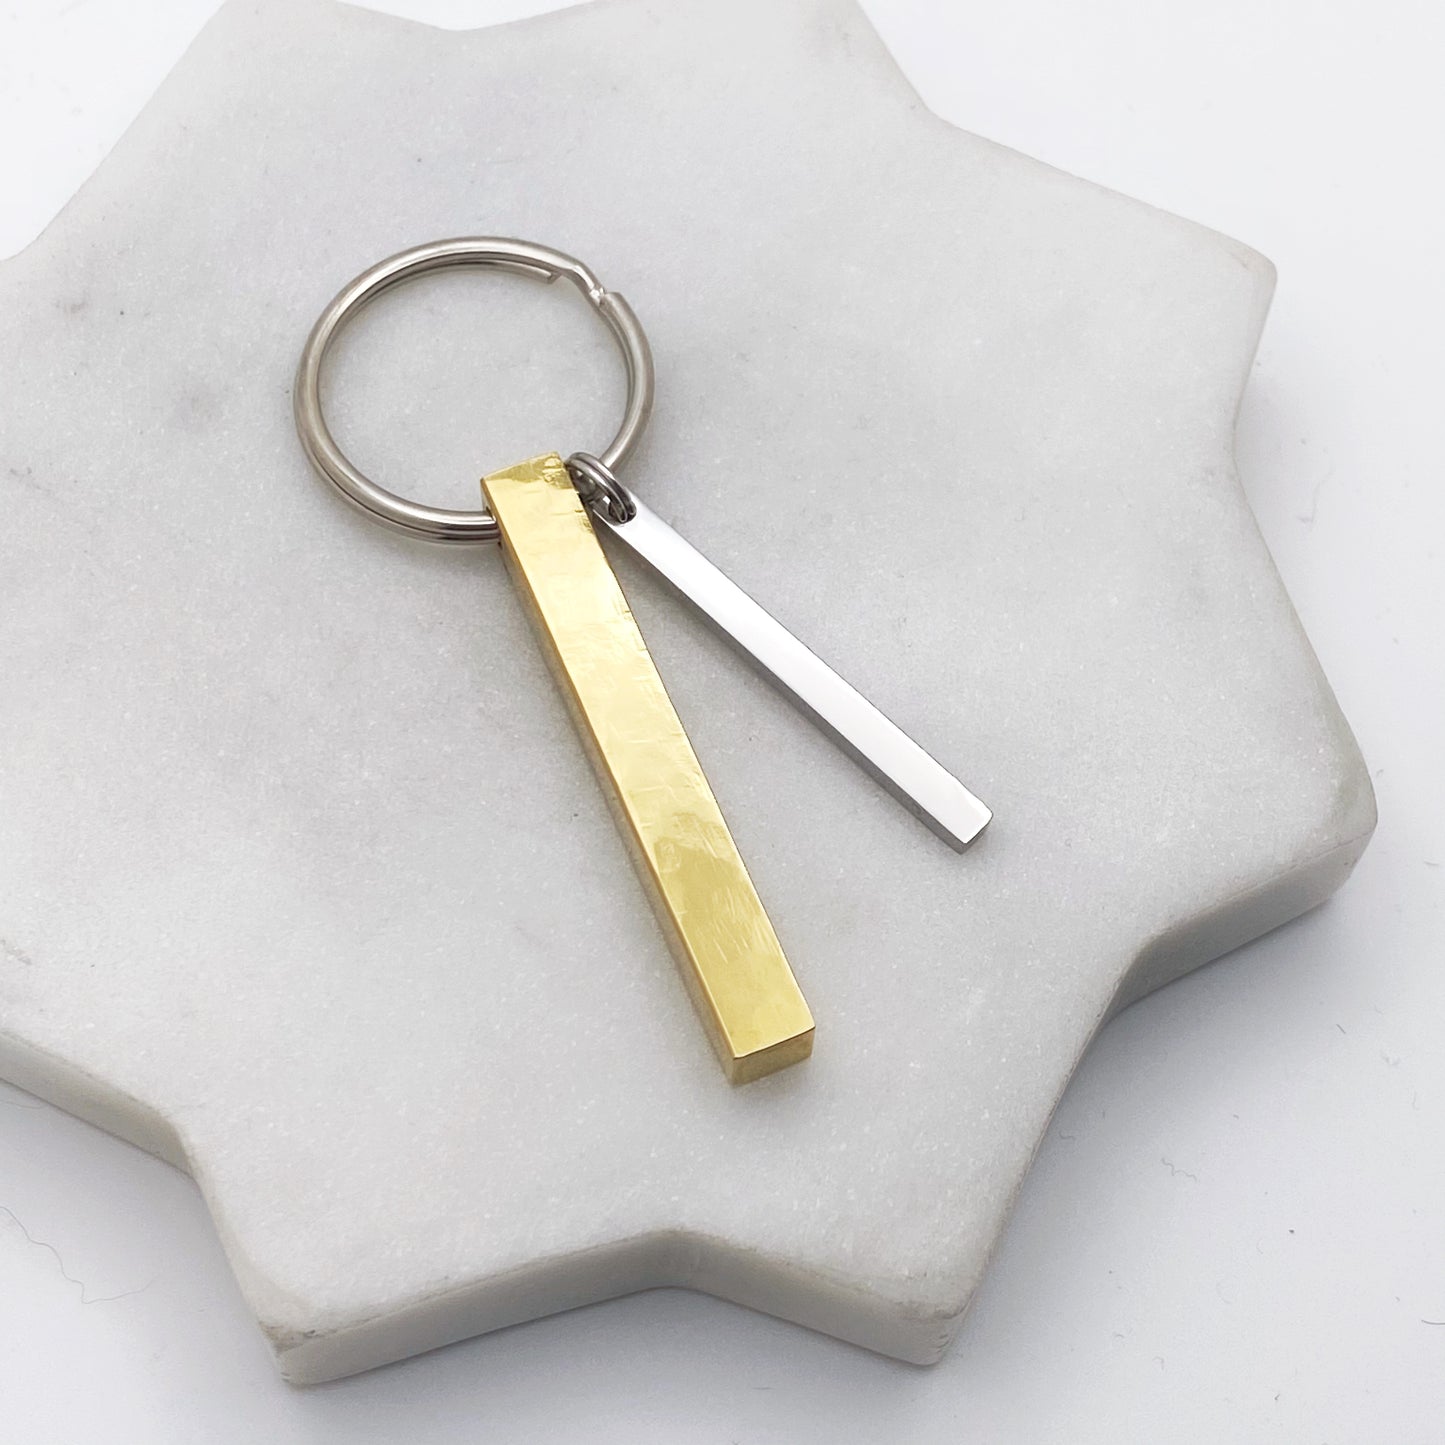 Thick and Thin, Hand Made Stainless Steel Keychain Keychains callistafaye   